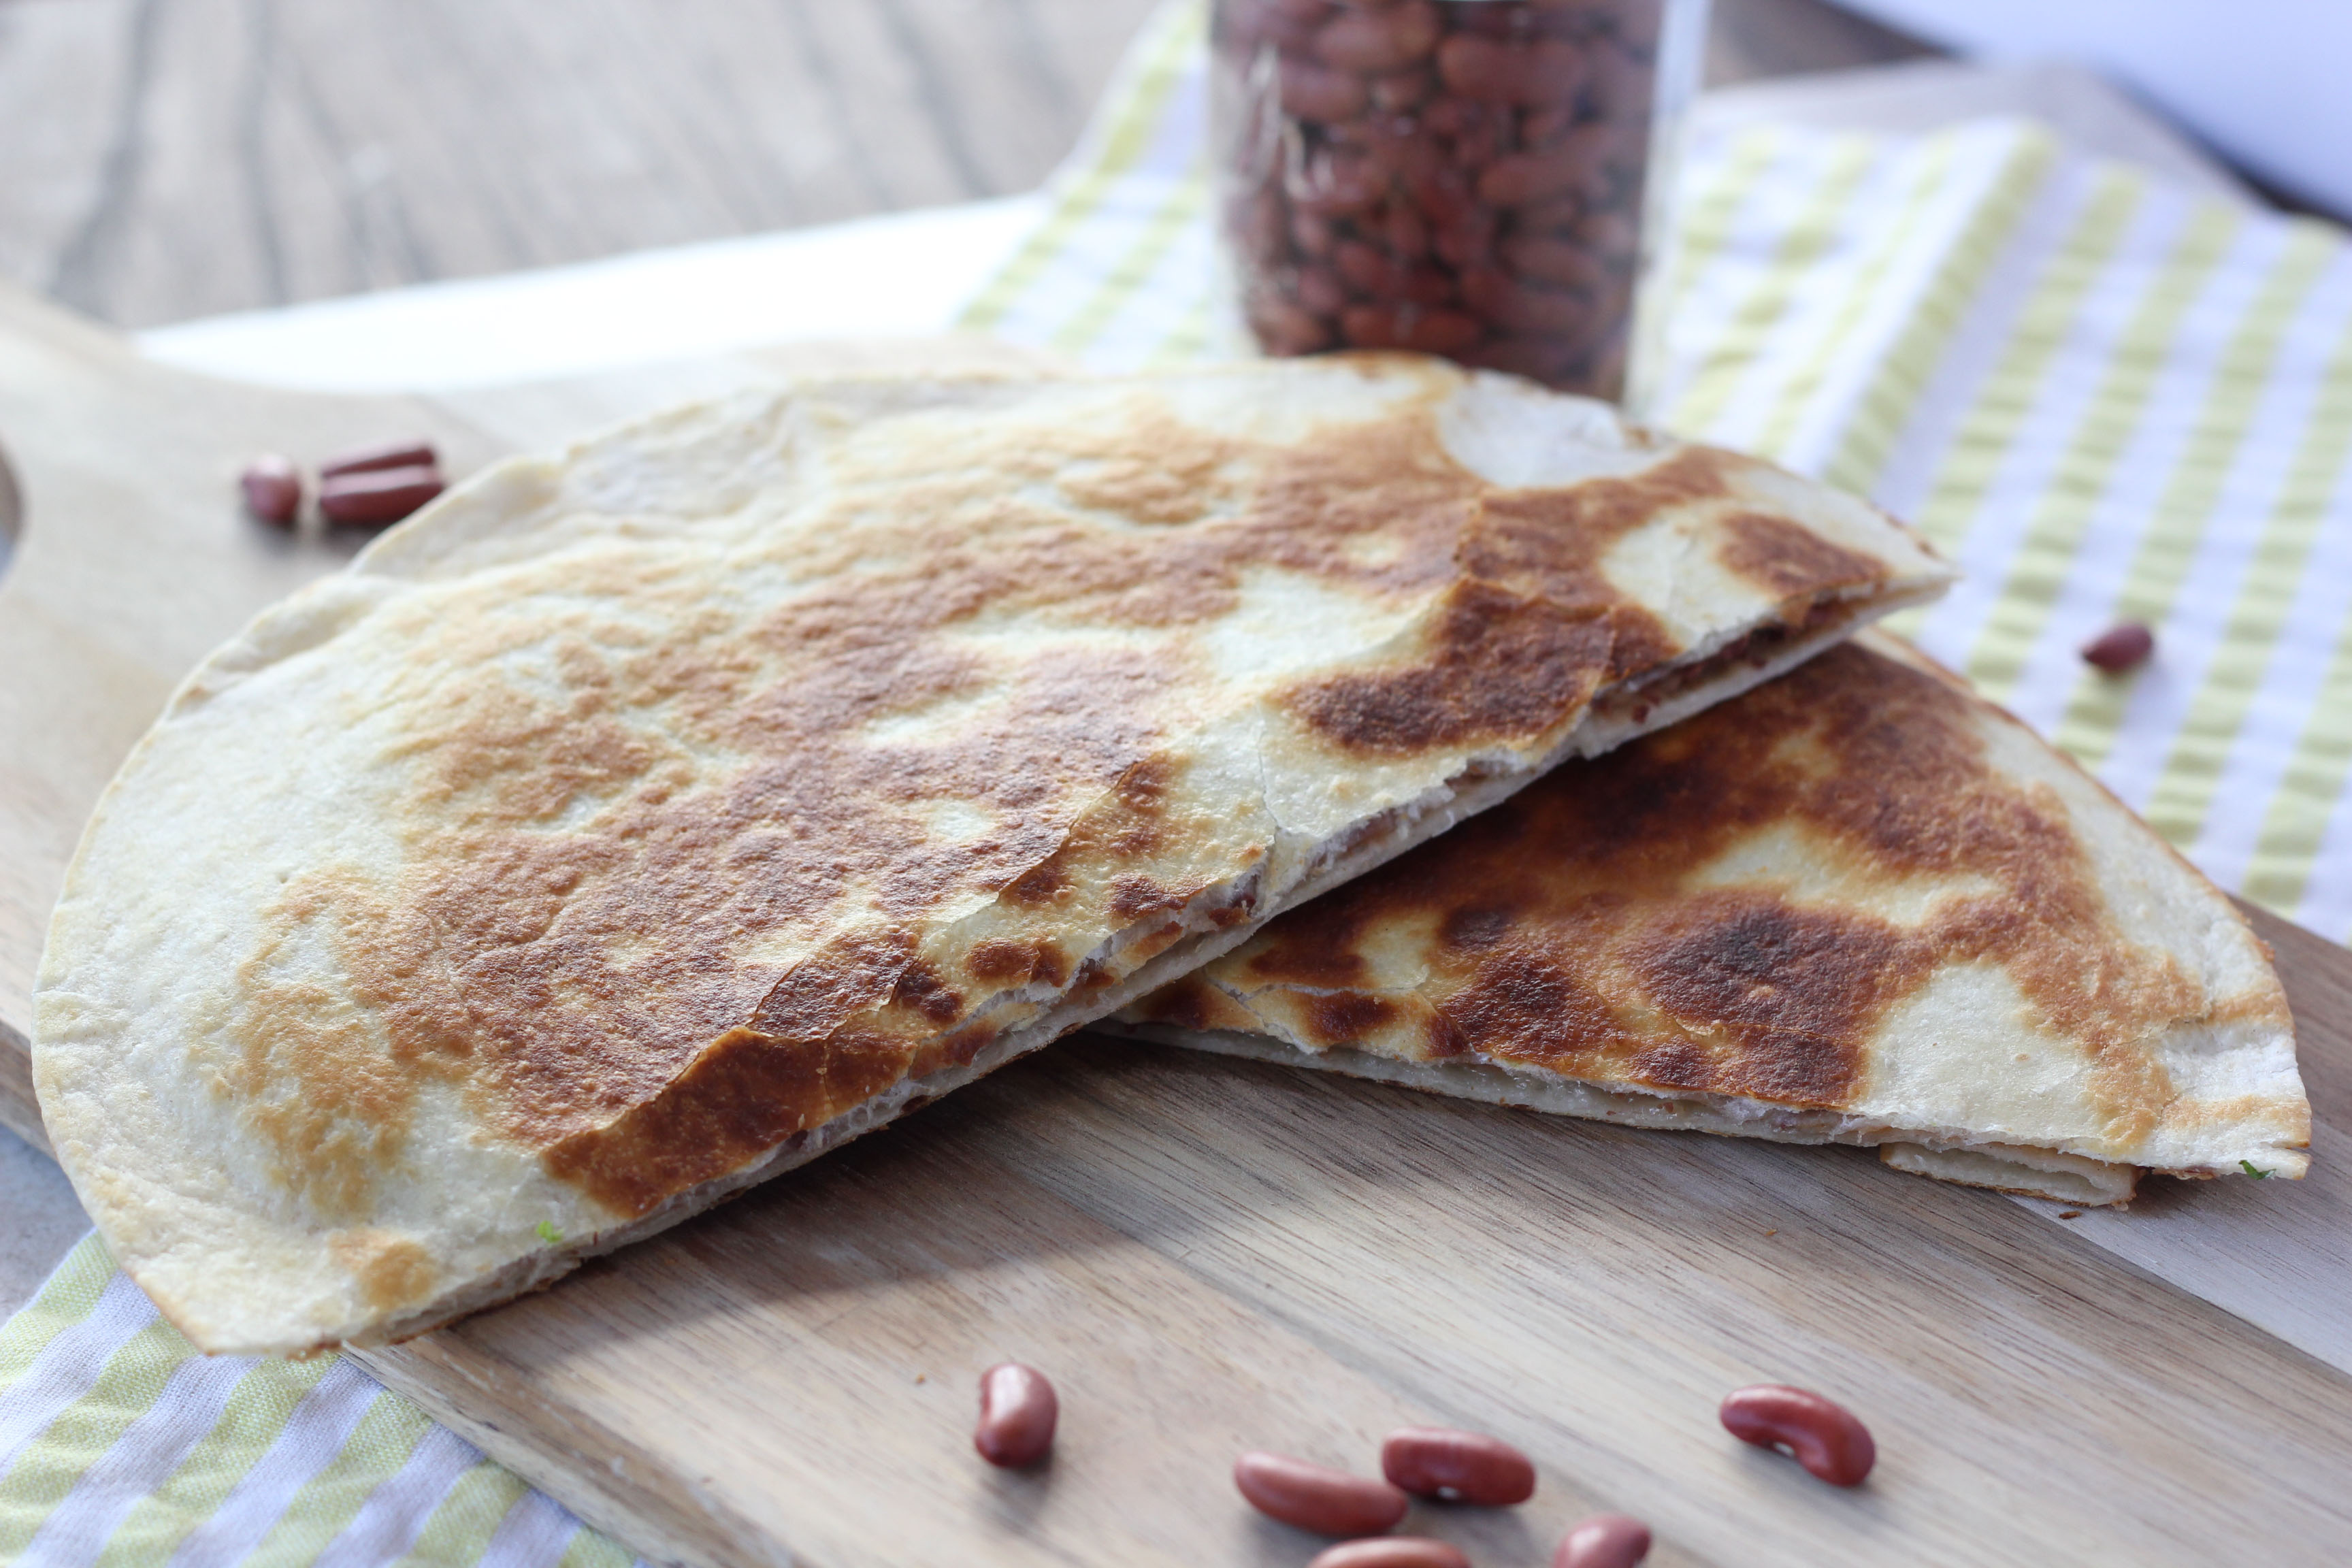 An image depicting the chili bean quesadillas.